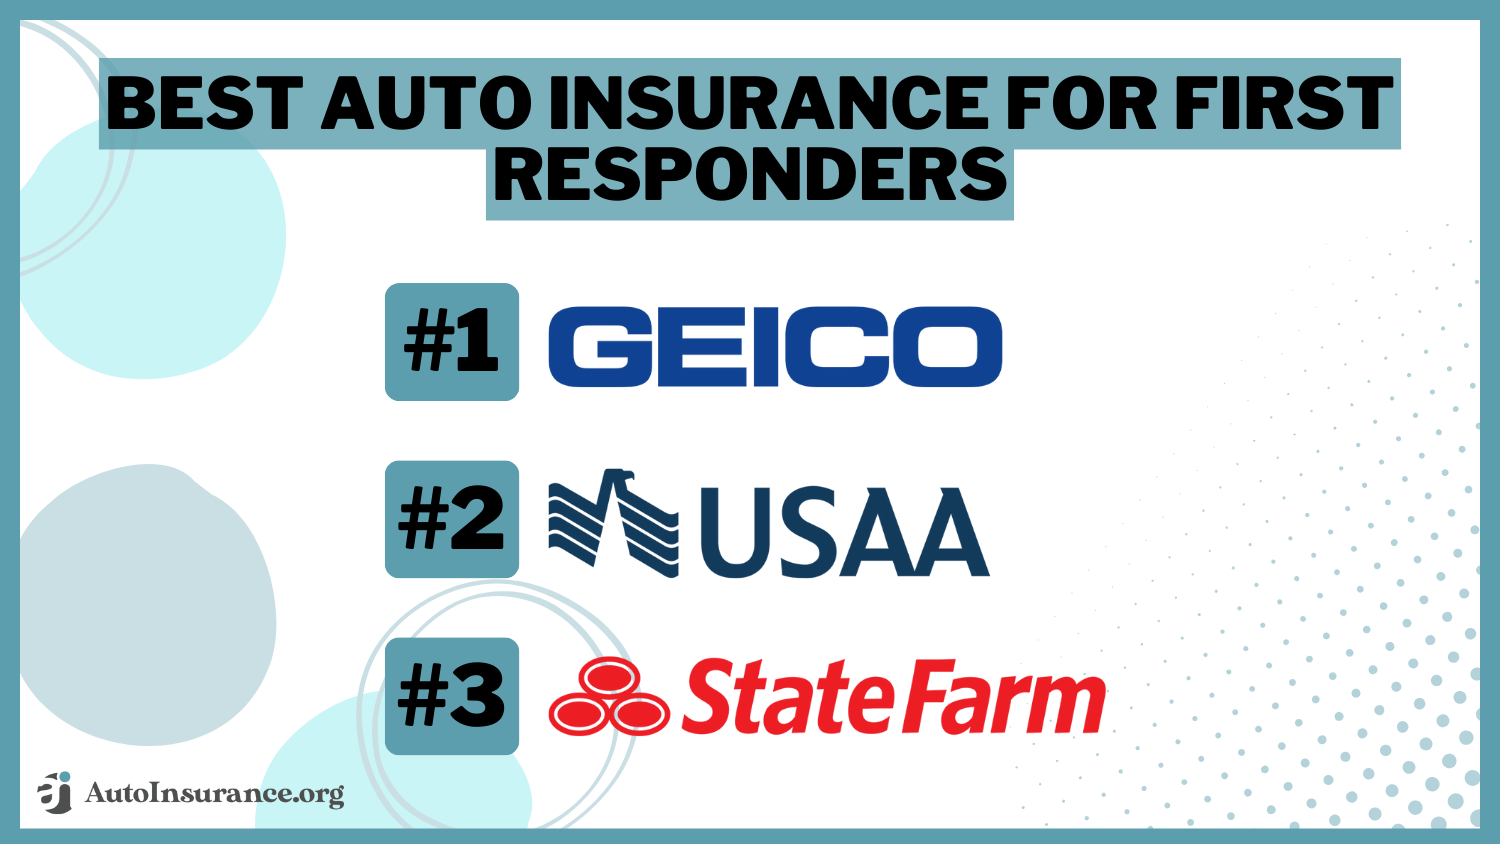 Best Auto Insurance for First Responders: Geico, USAA, State Farm